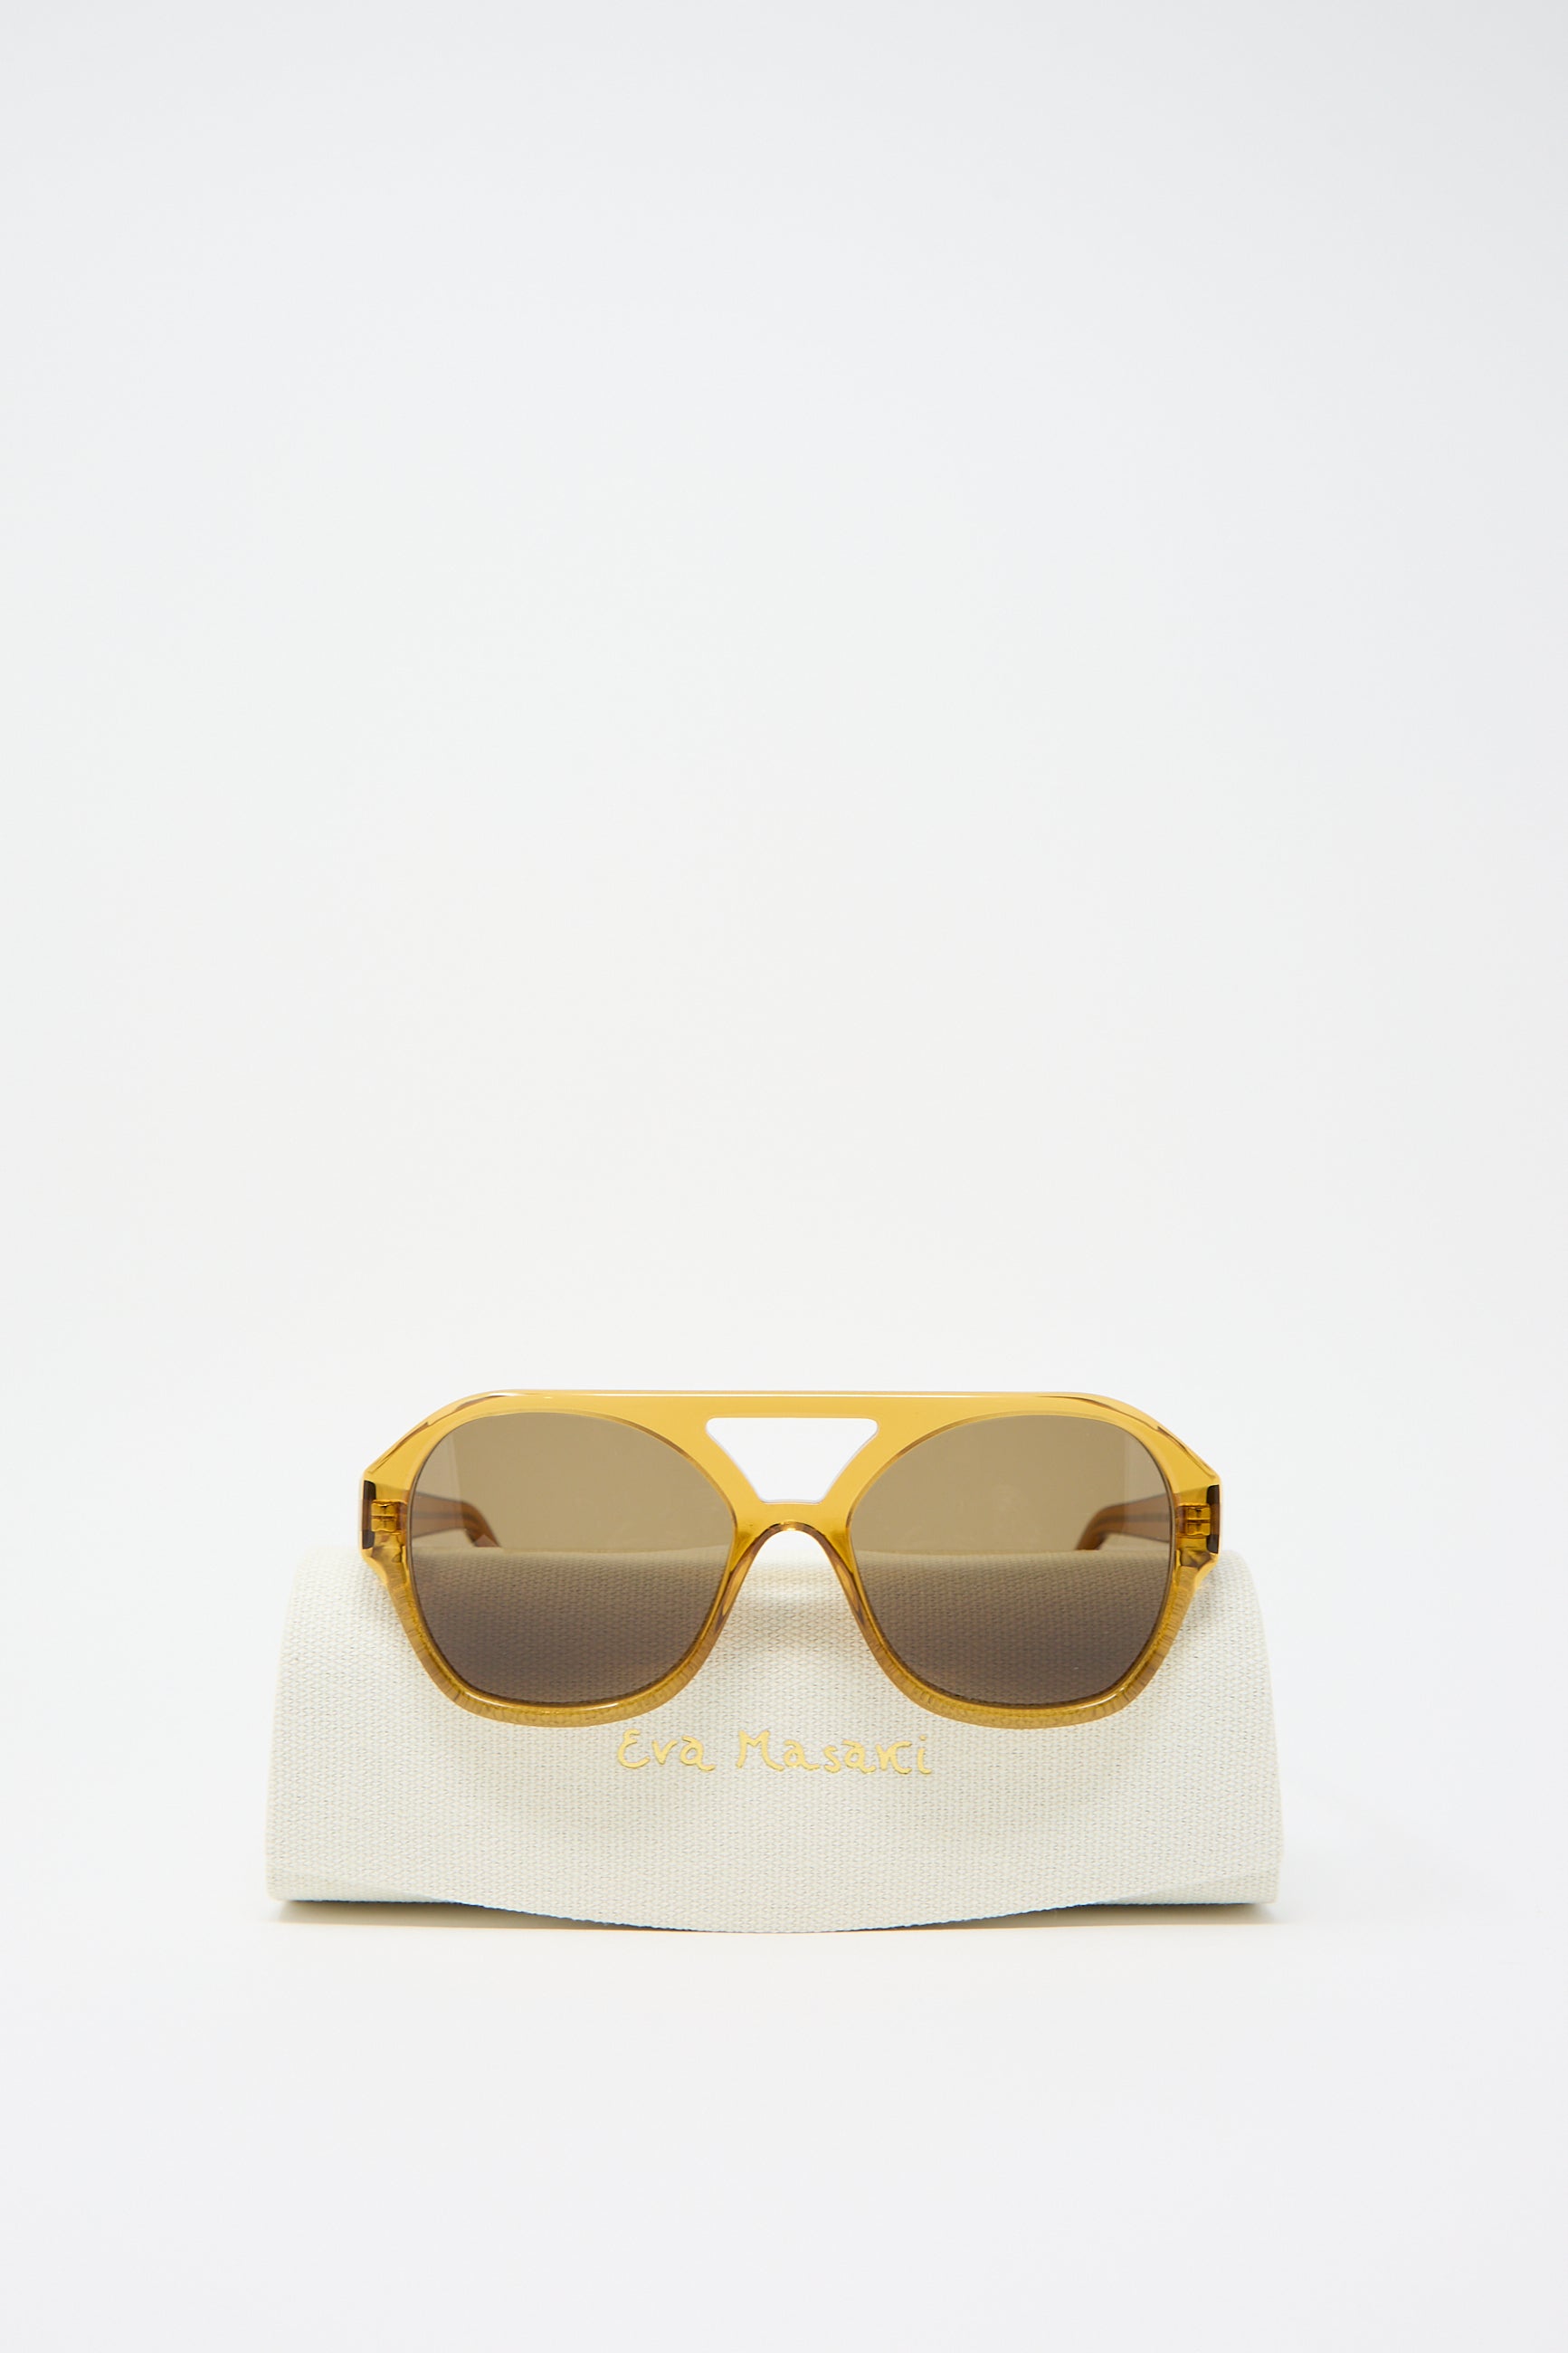 Chiyo Aviator Sunglasses in Honey by Eva Masaki are displayed on a white case with gold lettering against a plain white background, showcasing both their stylish design and UV protection.